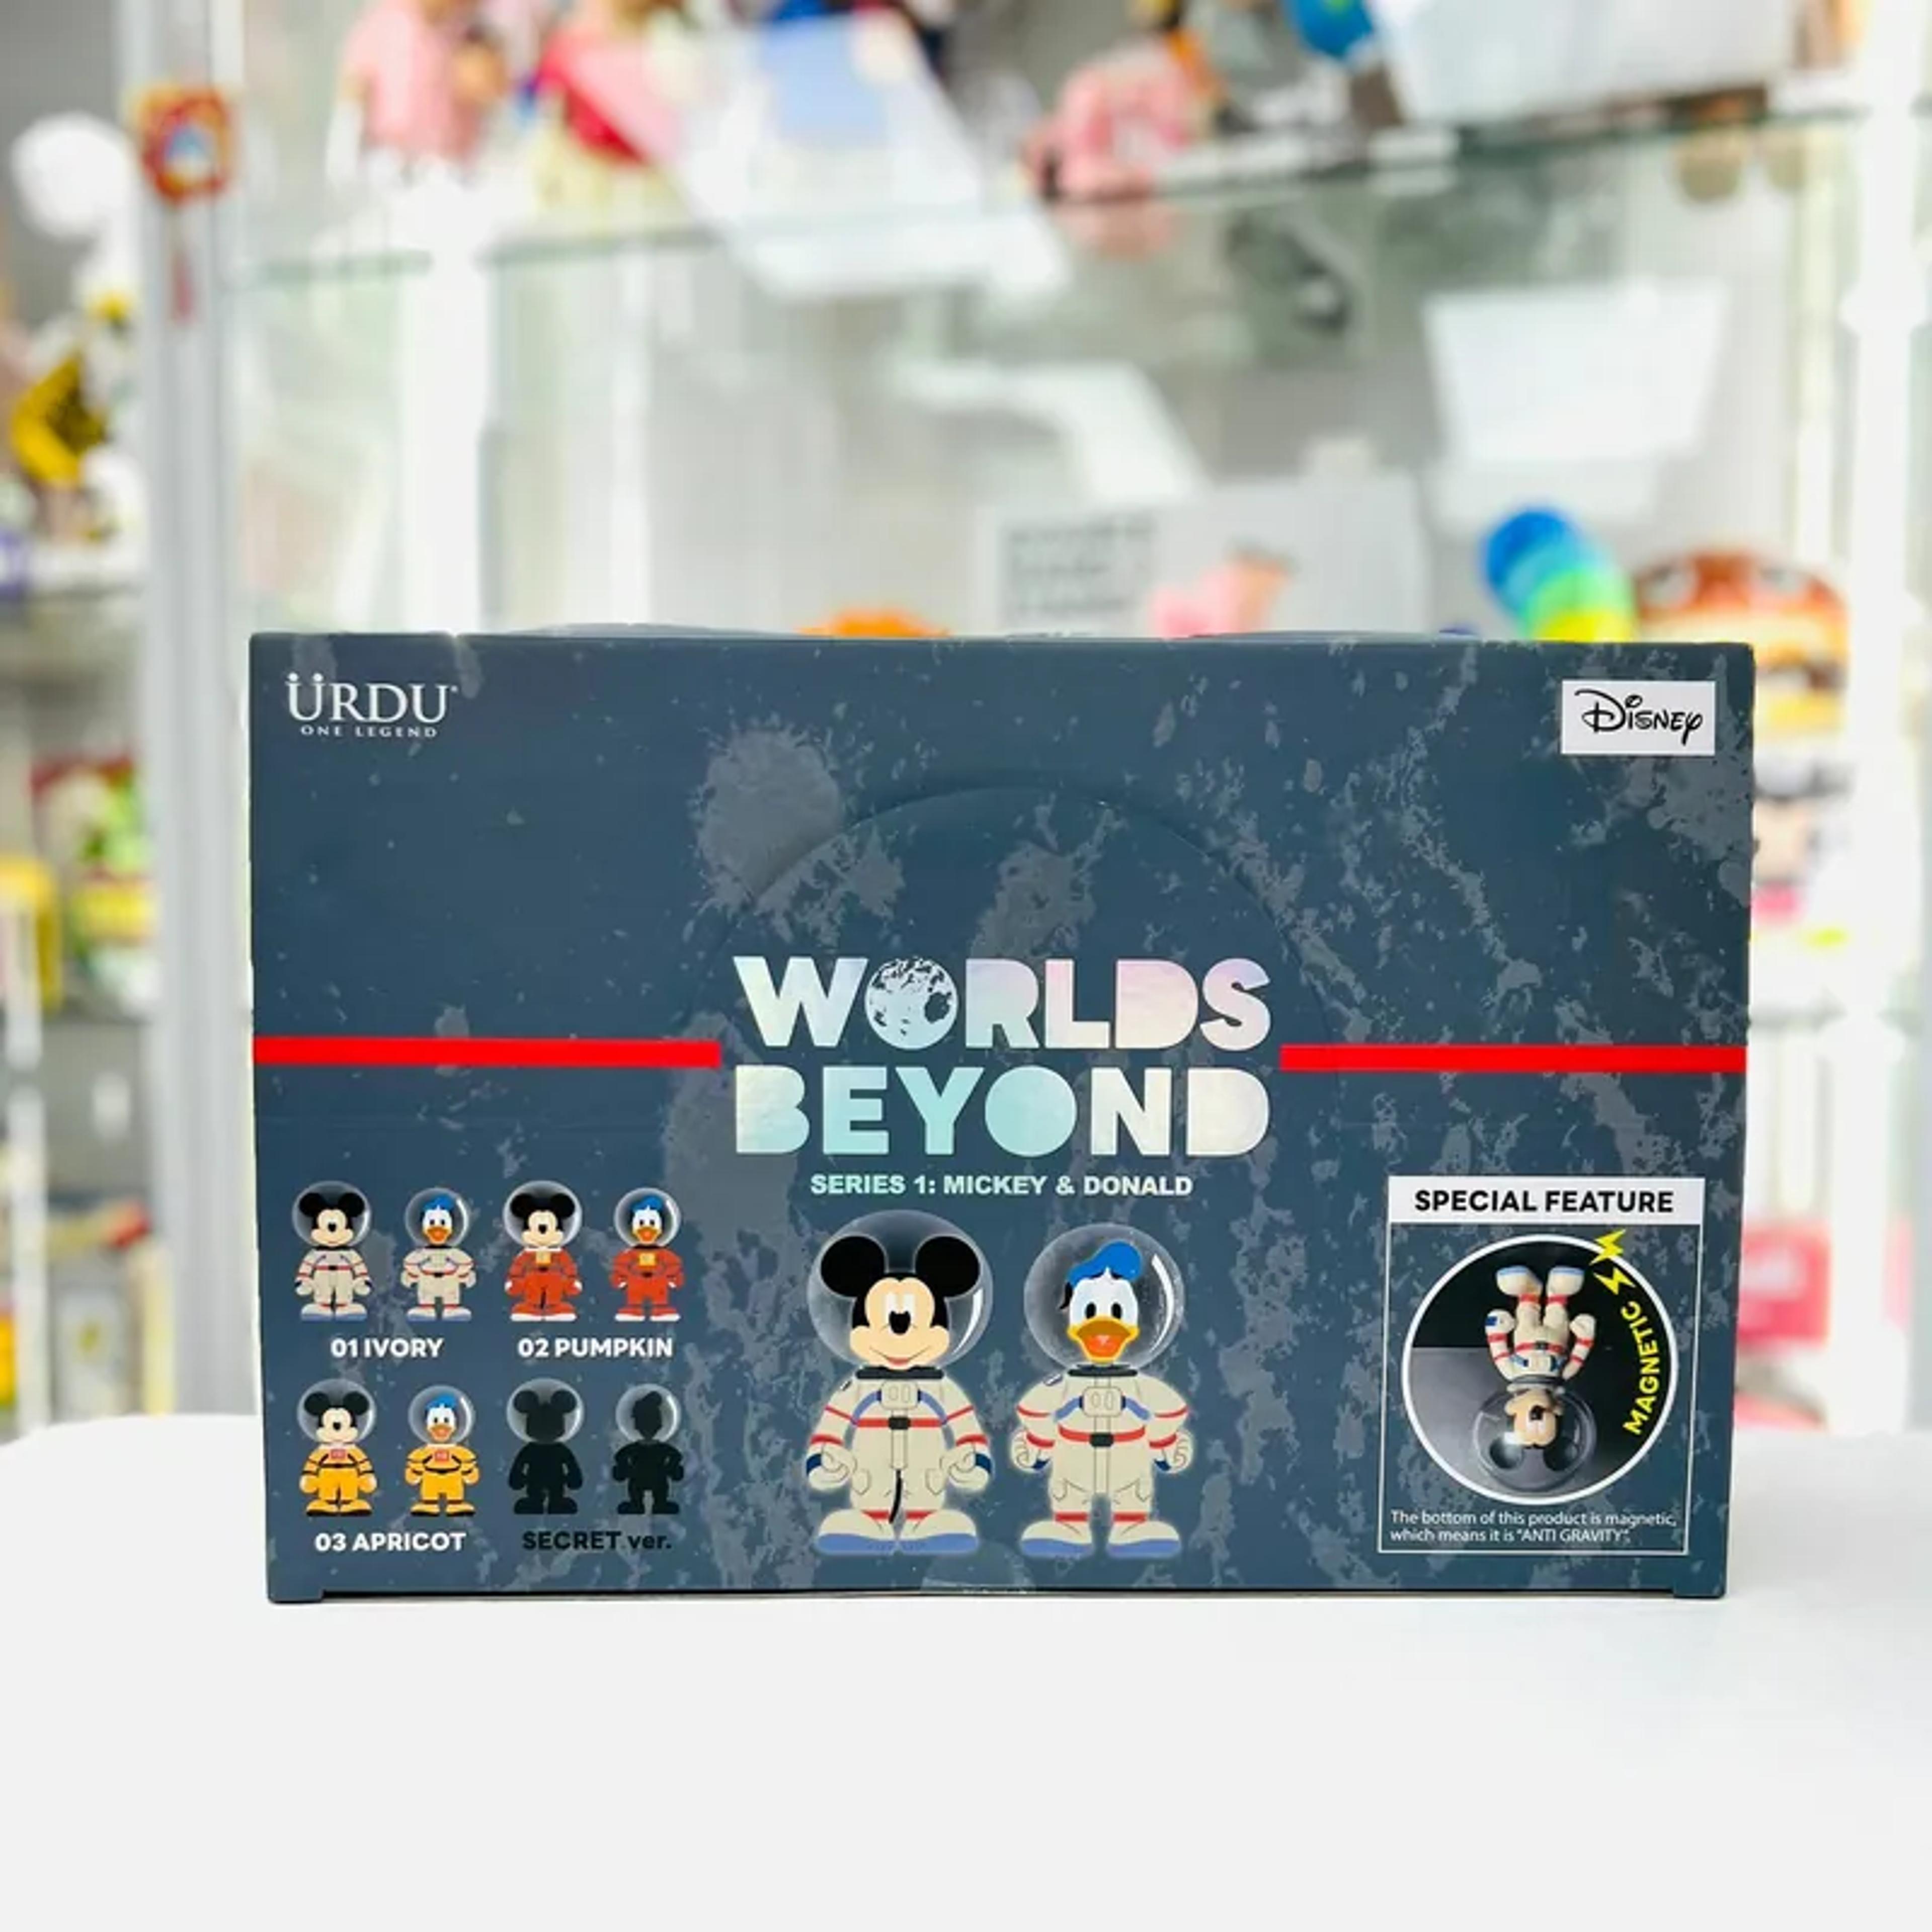 [Free shipping] URDU WORLDS BEYOND SERIES 1 MICKEY & DONALD (6 Blind Boxes in 1 Whole Set)